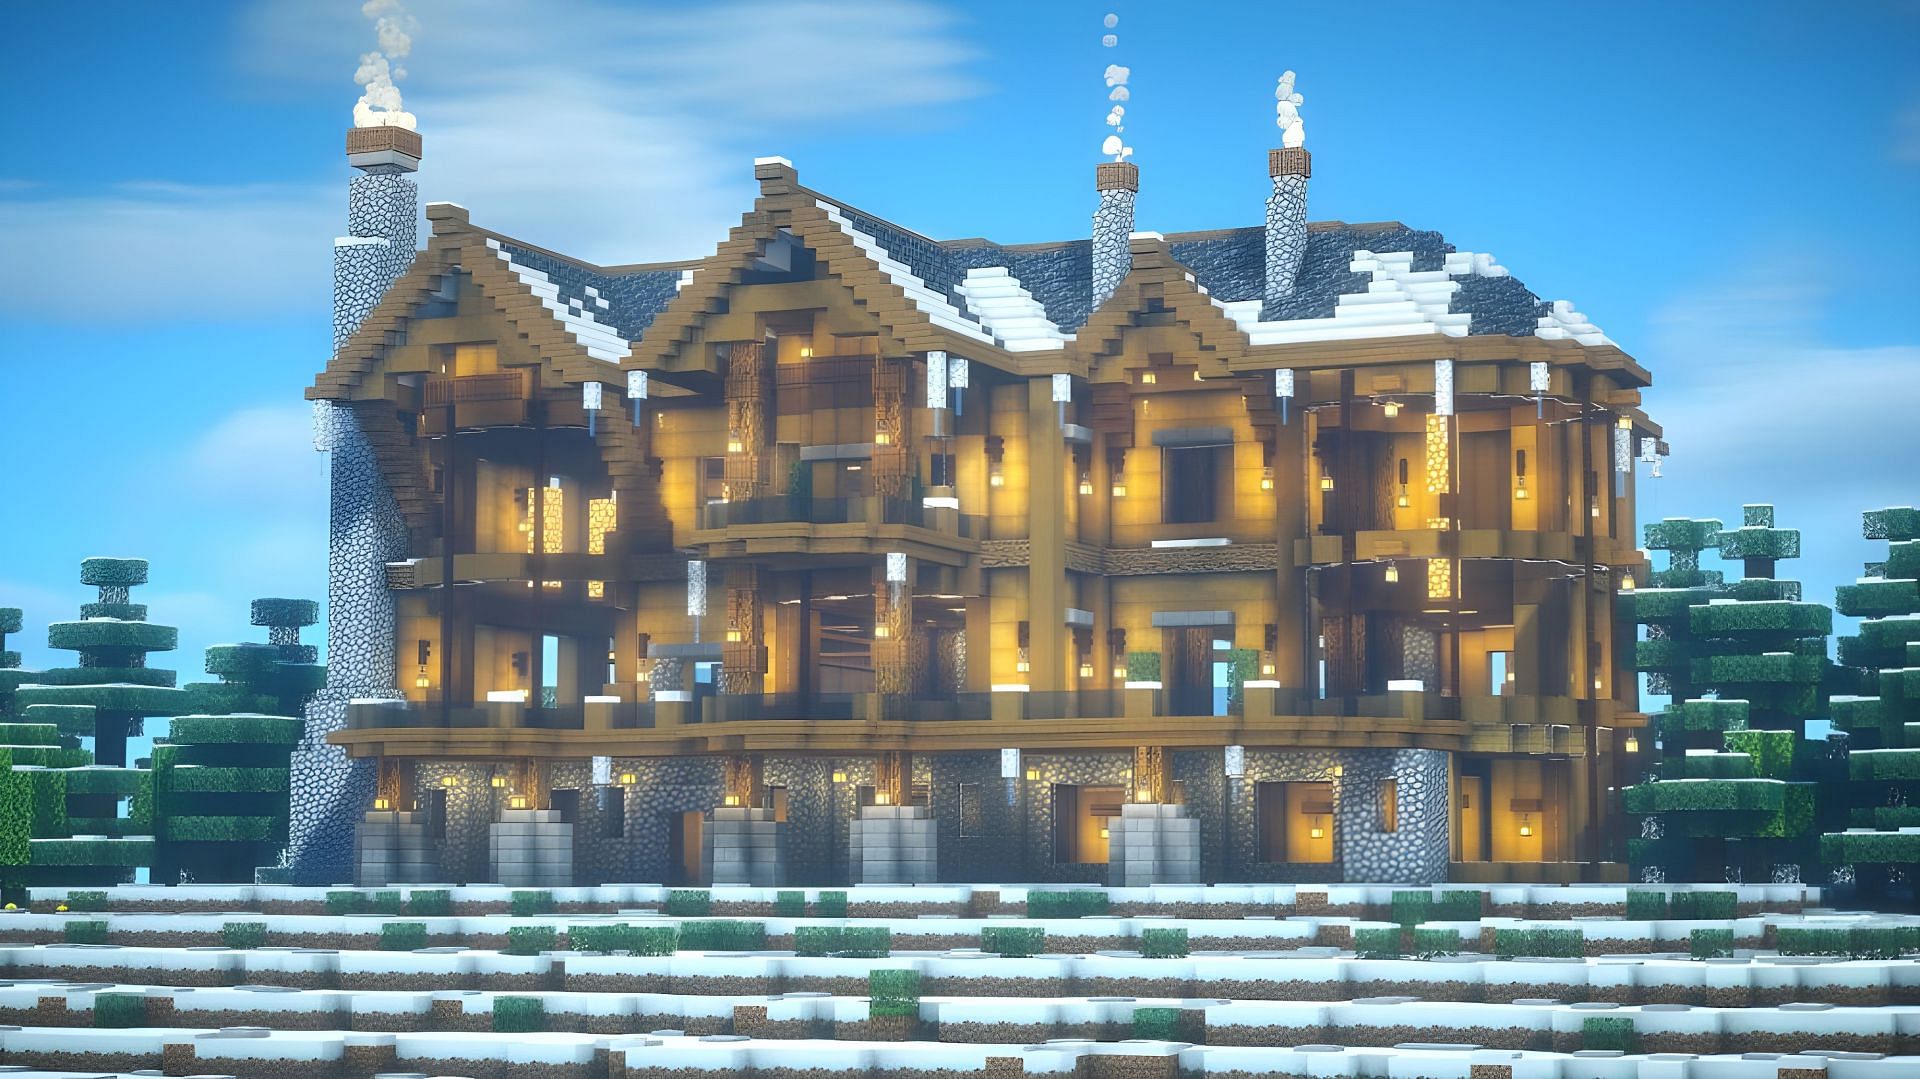 The Winter Log Cabin Mansion (Image via YouTube/FlyingCow)